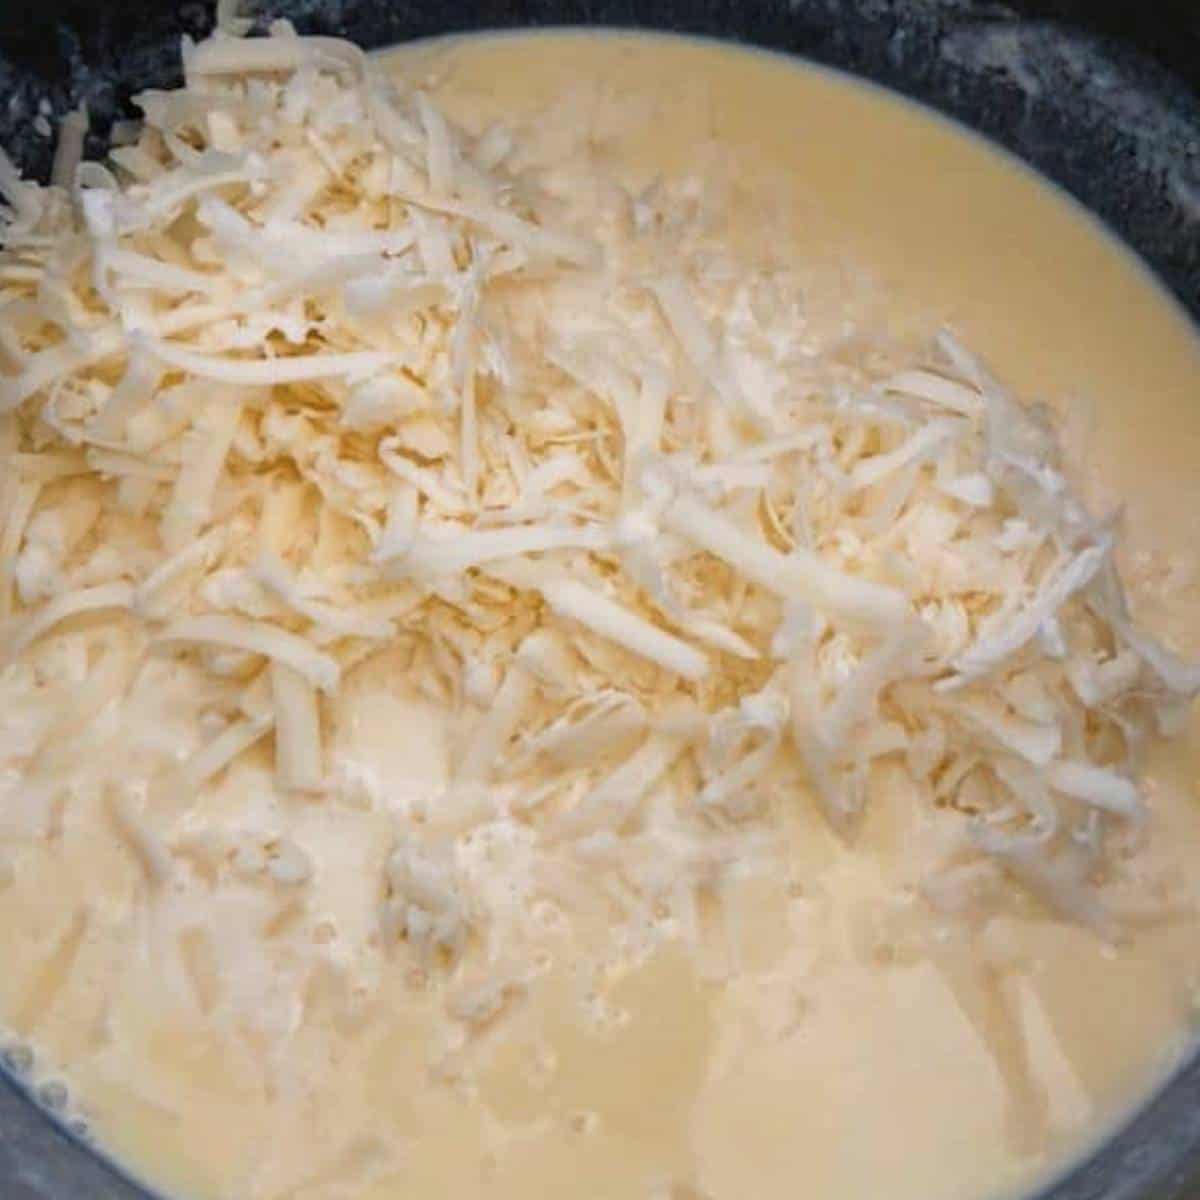 Cheese in roux in skillet macaroni and cheese.